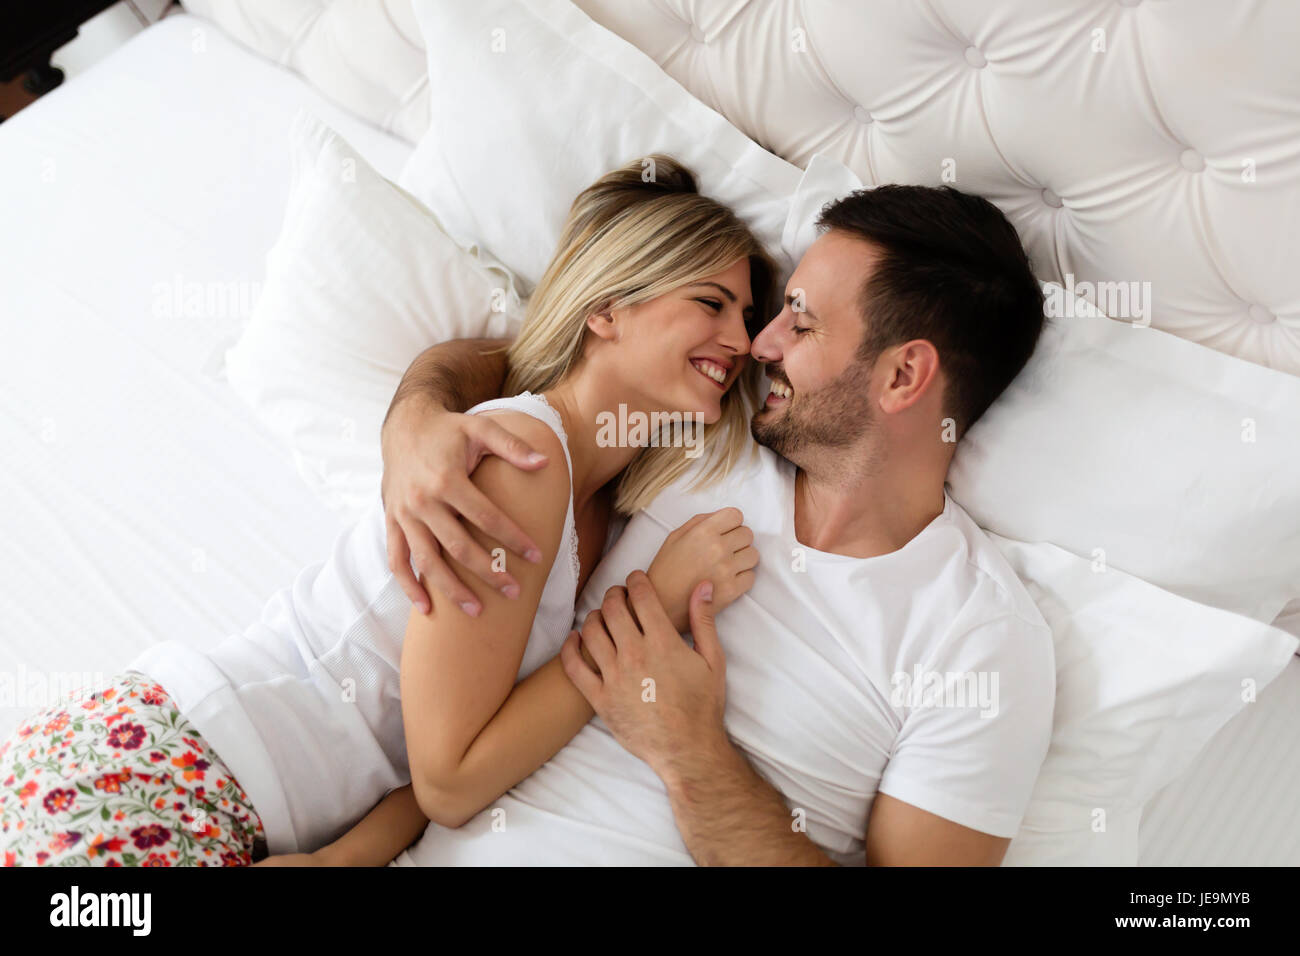 Handsome man and beautiful woman kissing each other Stock Photo